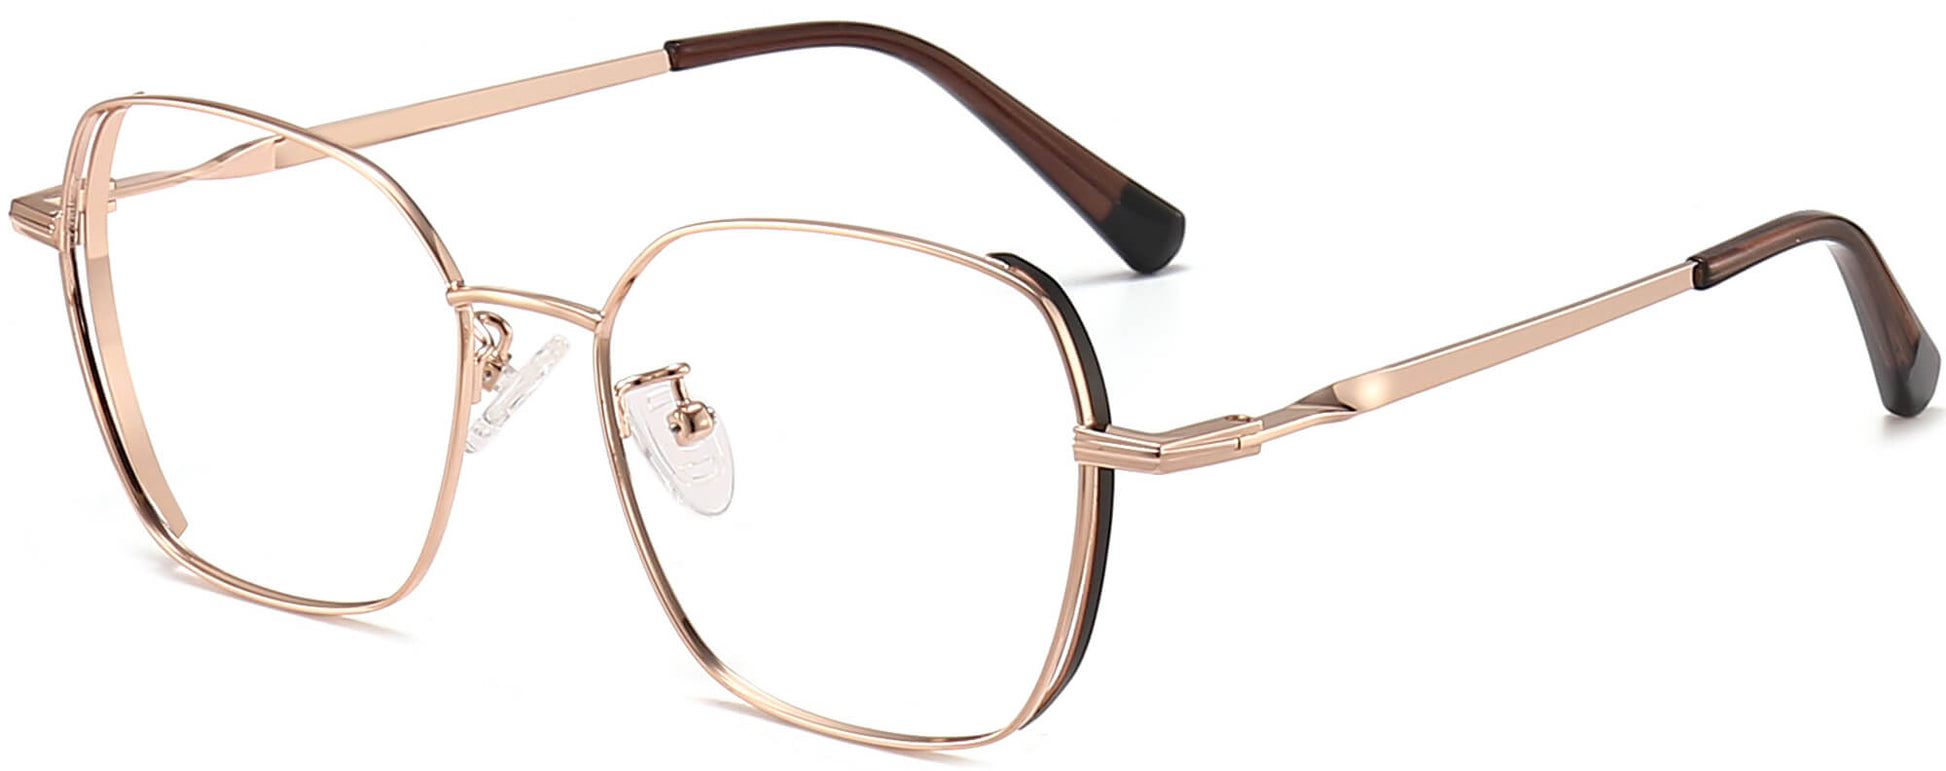 Maliyah Square Gold Eyeglasses from ANRRI, angle view